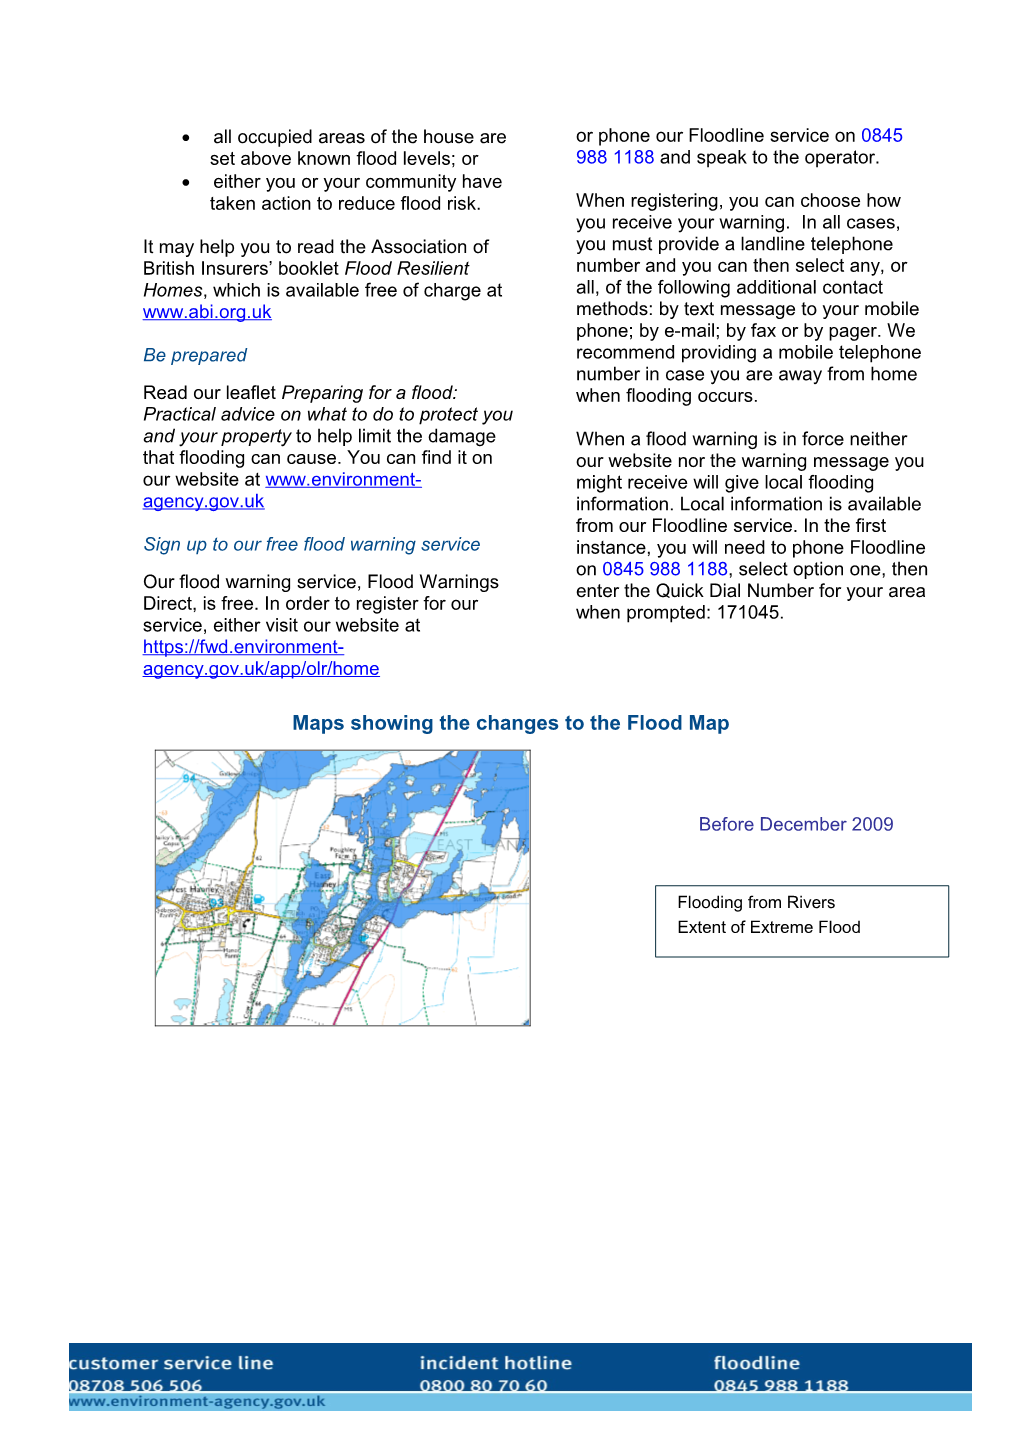 Important Information About Flooding in Your Area